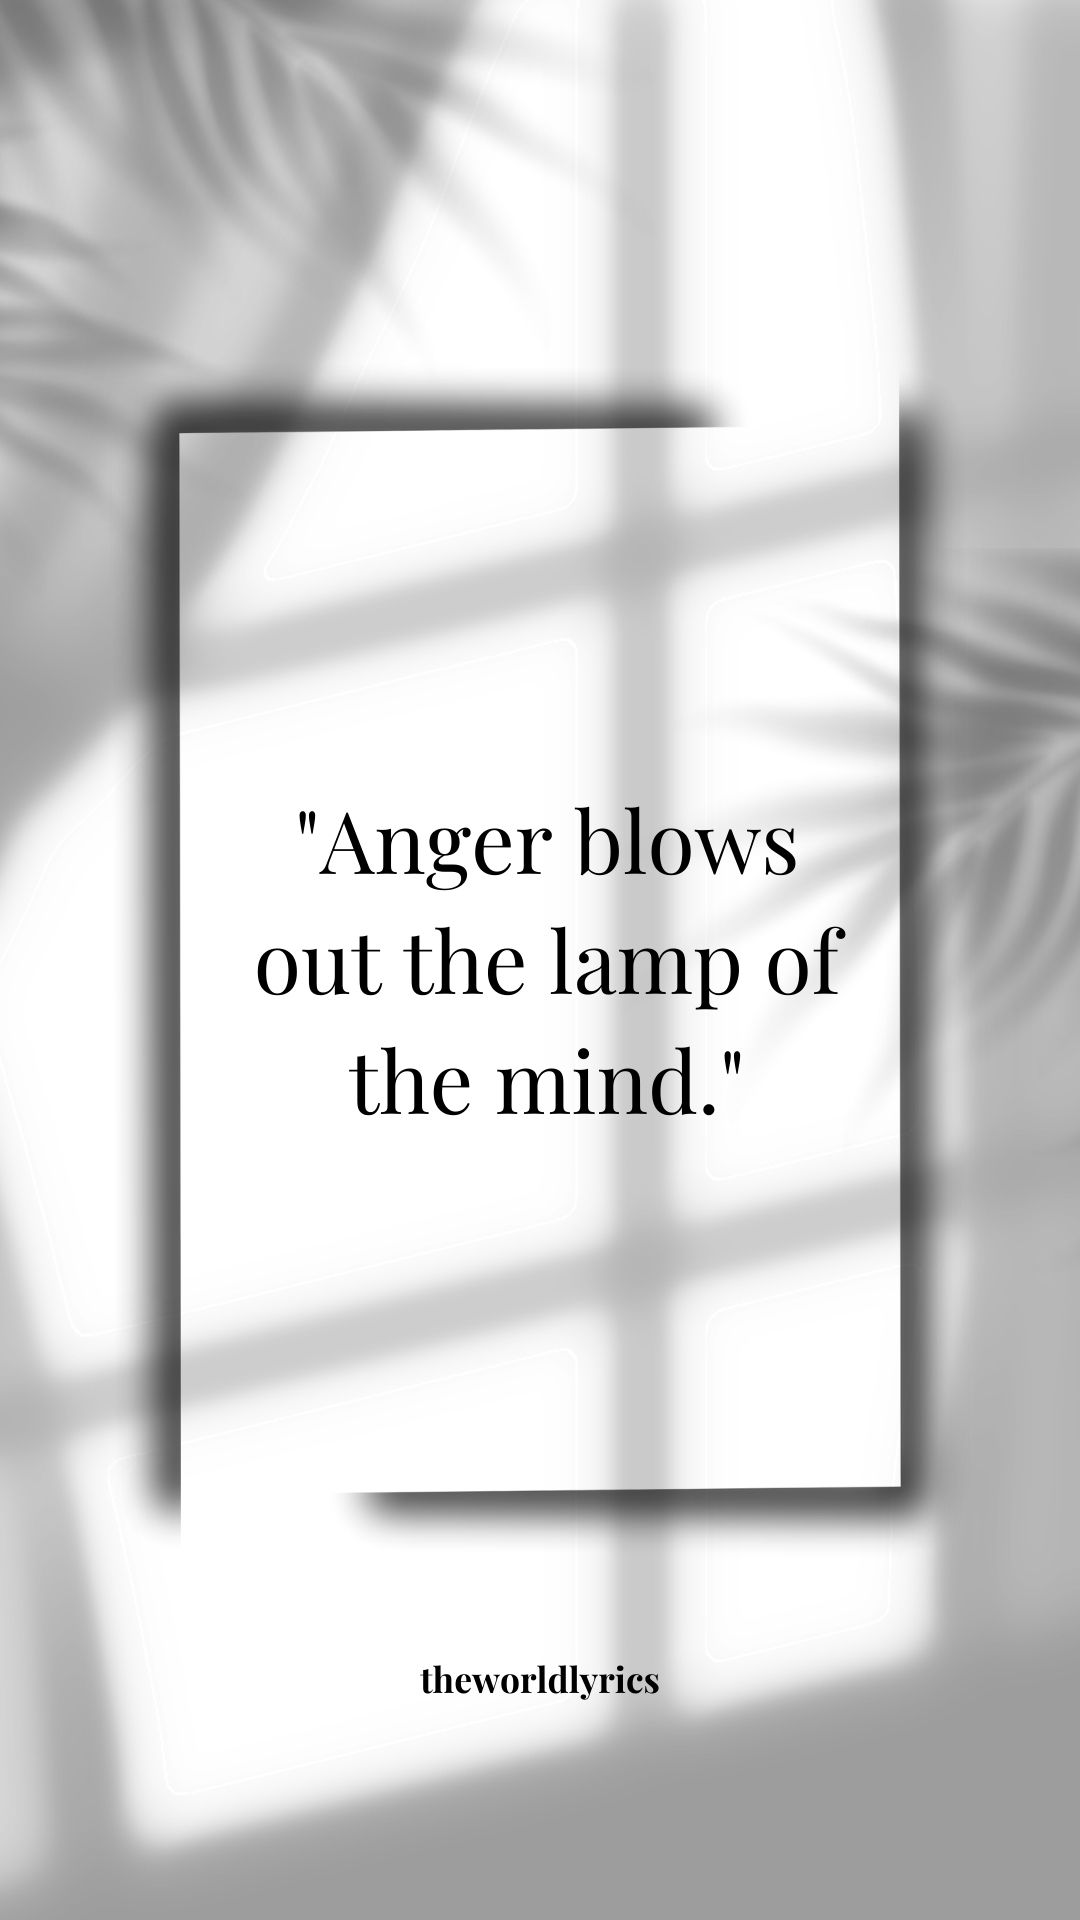 Anger blows out the lamp of the mind